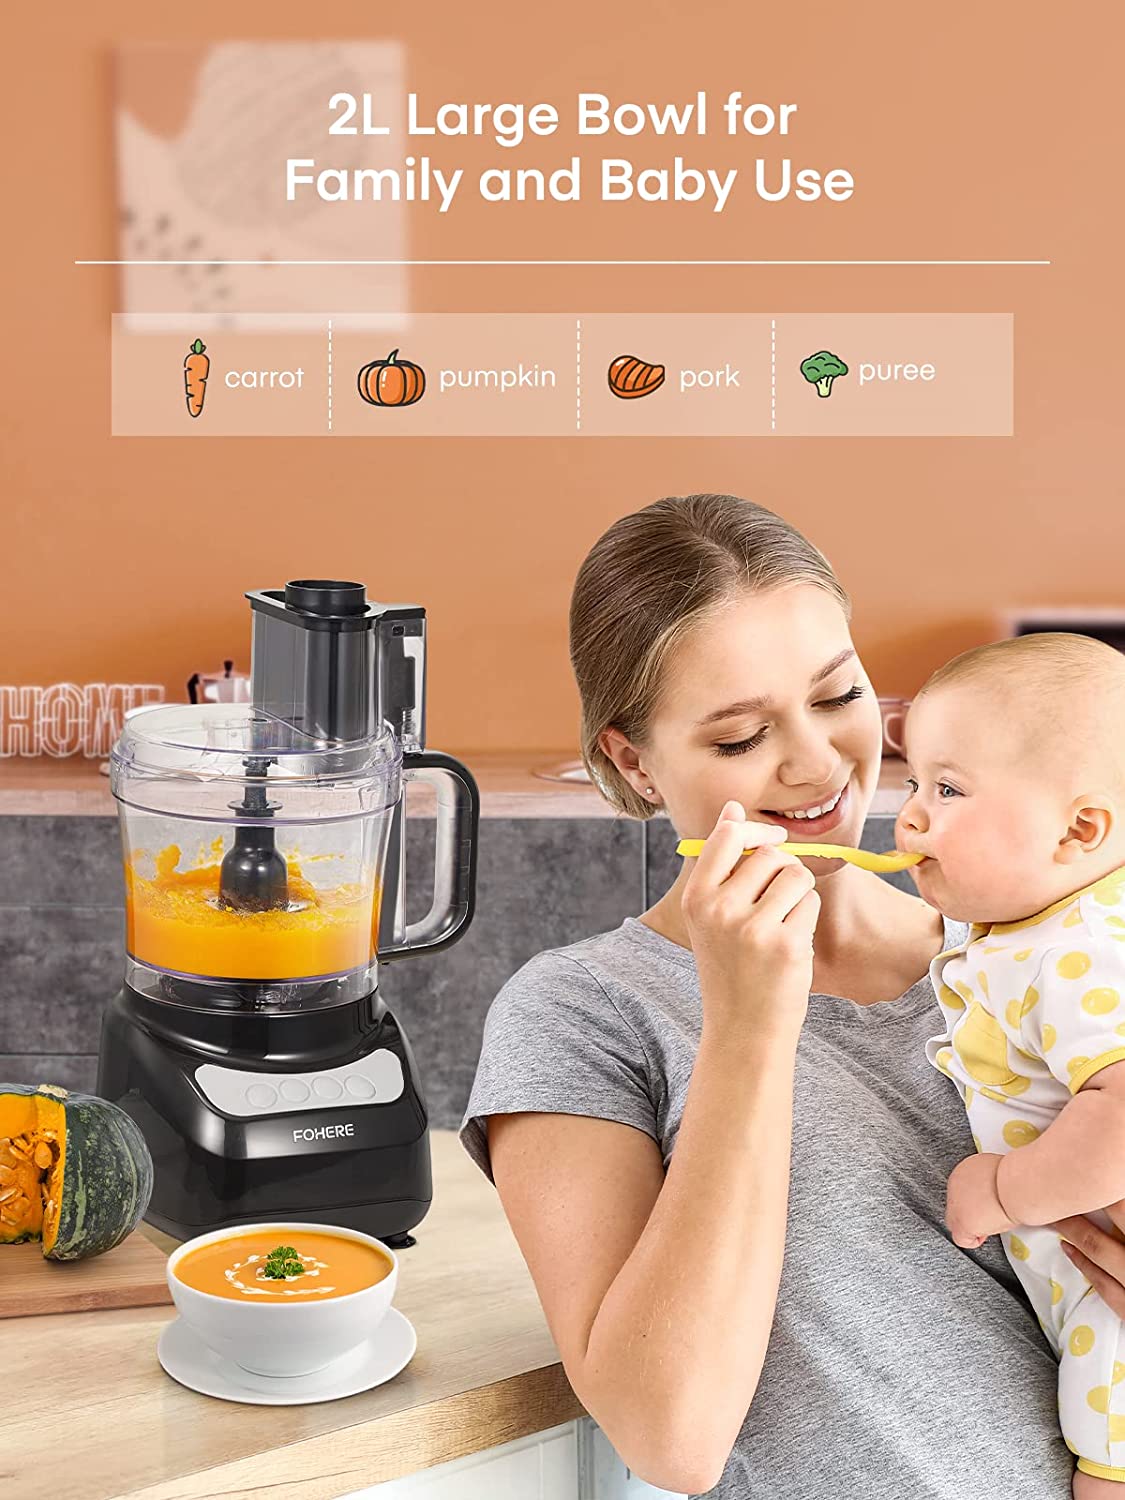 2l large bowel for family and baby use, FOHERE Food Processor, 12 Cup, 4 Functions for Chopping, Slicing, Purees & Dough, Black